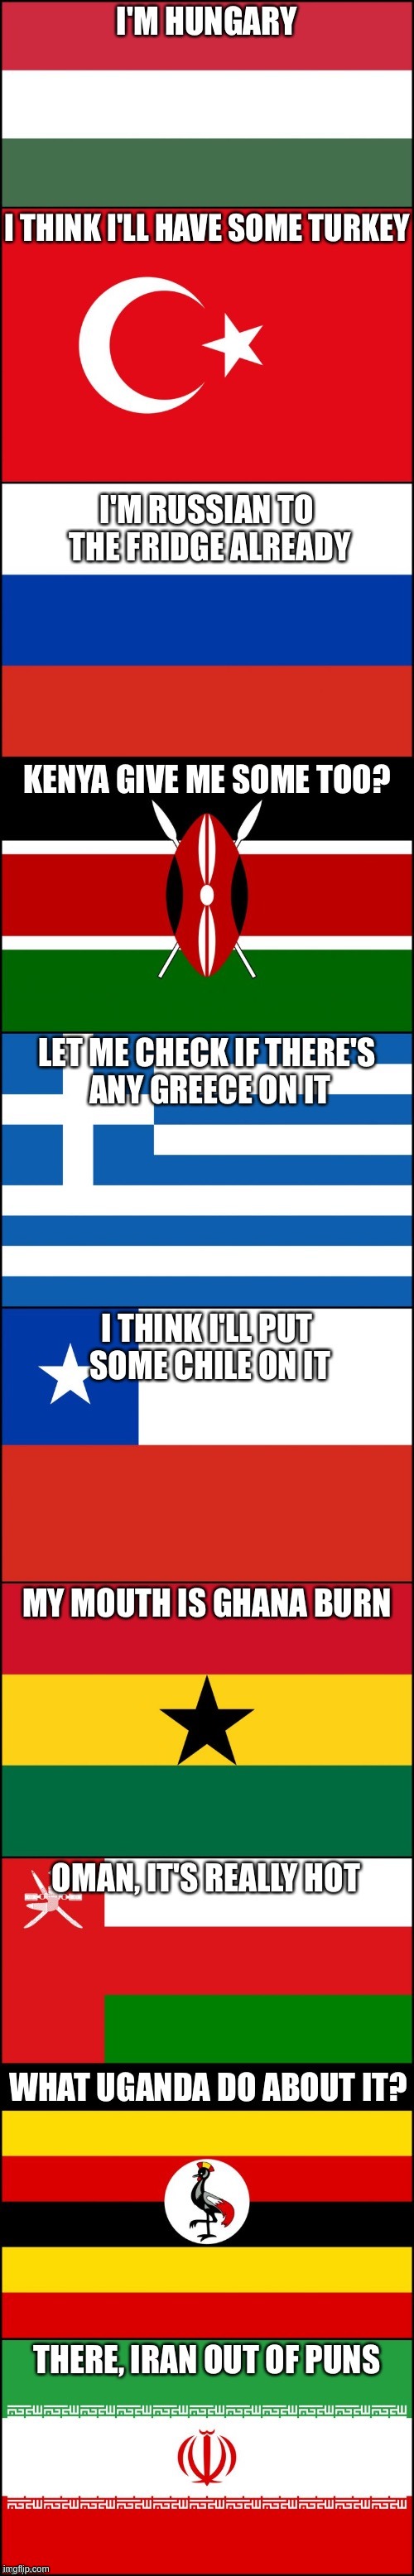 shut- i did this with my social studies teacher | I'M HUNGARY THERE, IRAN OUT OF PUNS I THINK I'LL HAVE SOME TURKEY I'M RUSSIAN TO THE FRIDGE ALREADY KENYA GIVE ME SOME TOO? LET ME CHECK IF THERE'S ANY GREECE ON IT I THINK I'LL PUT SOME CHILE ON IT MY MOUTH IS GHANA BURN OMAN, ITS REALLY HOT WHAT YOU GONNA UGANDA DO ABOUT IT? THERE, IRAN OUT OF PUNS | image tagged in lol | made w/ Imgflip meme maker